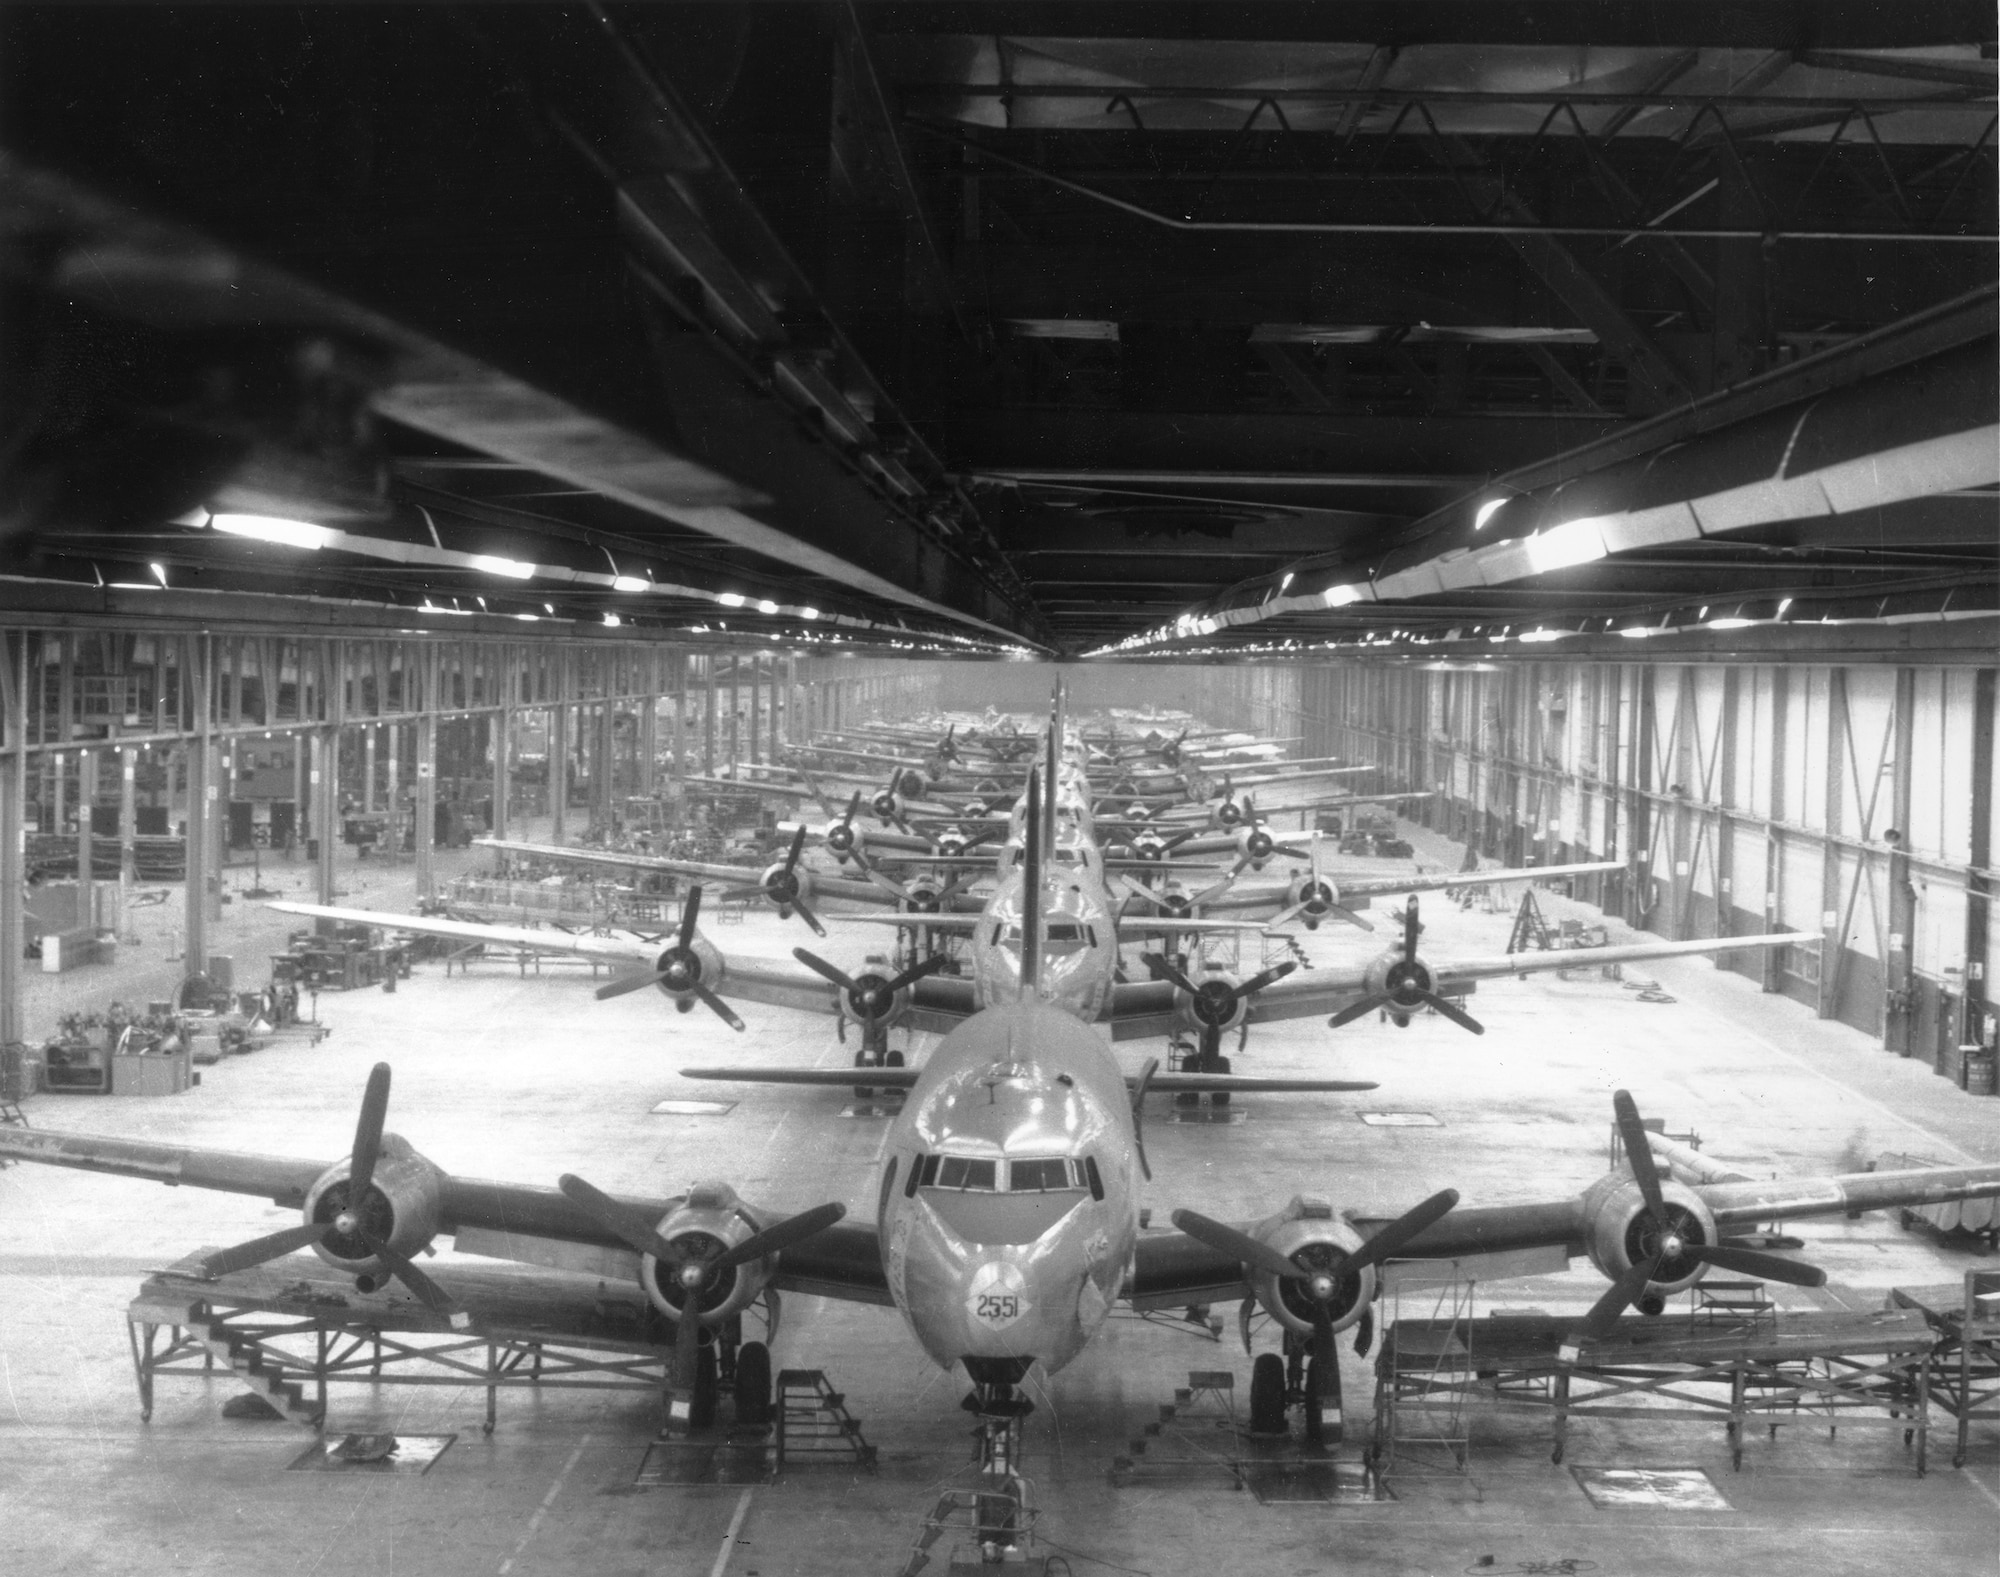 C-54 line in Bldg. 3001 at Tinker in the mid-1940s. (Photo courtesy of Tinker History Office)